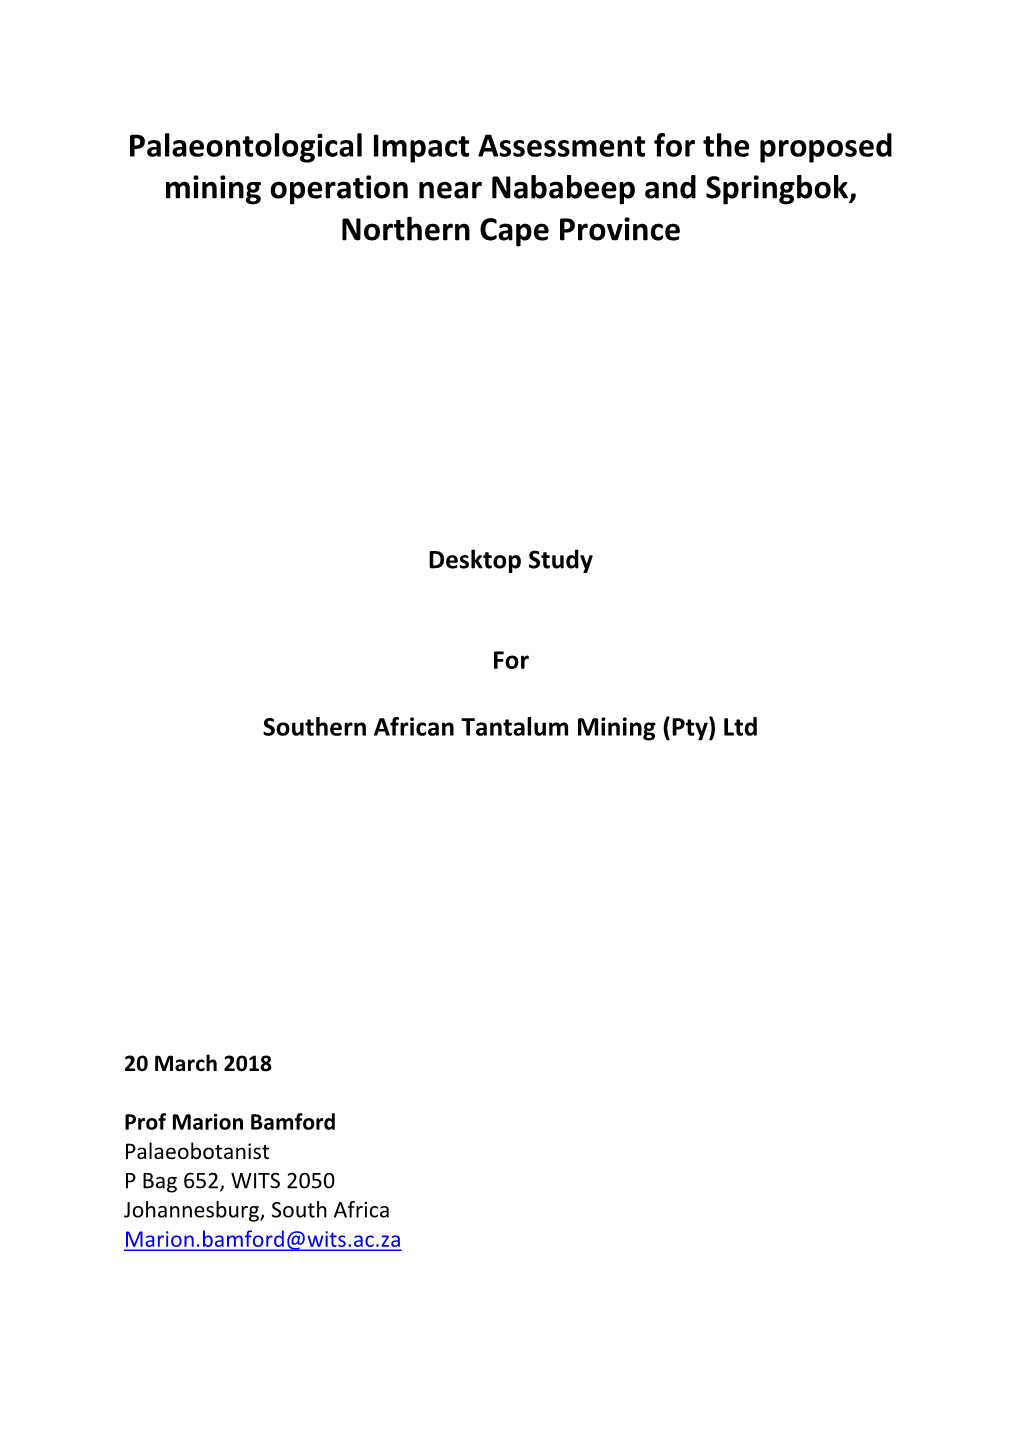 Palaeontological Impact Assessment for the Proposed Mining Operation Near Nababeep and Springbok, Northern Cape Province